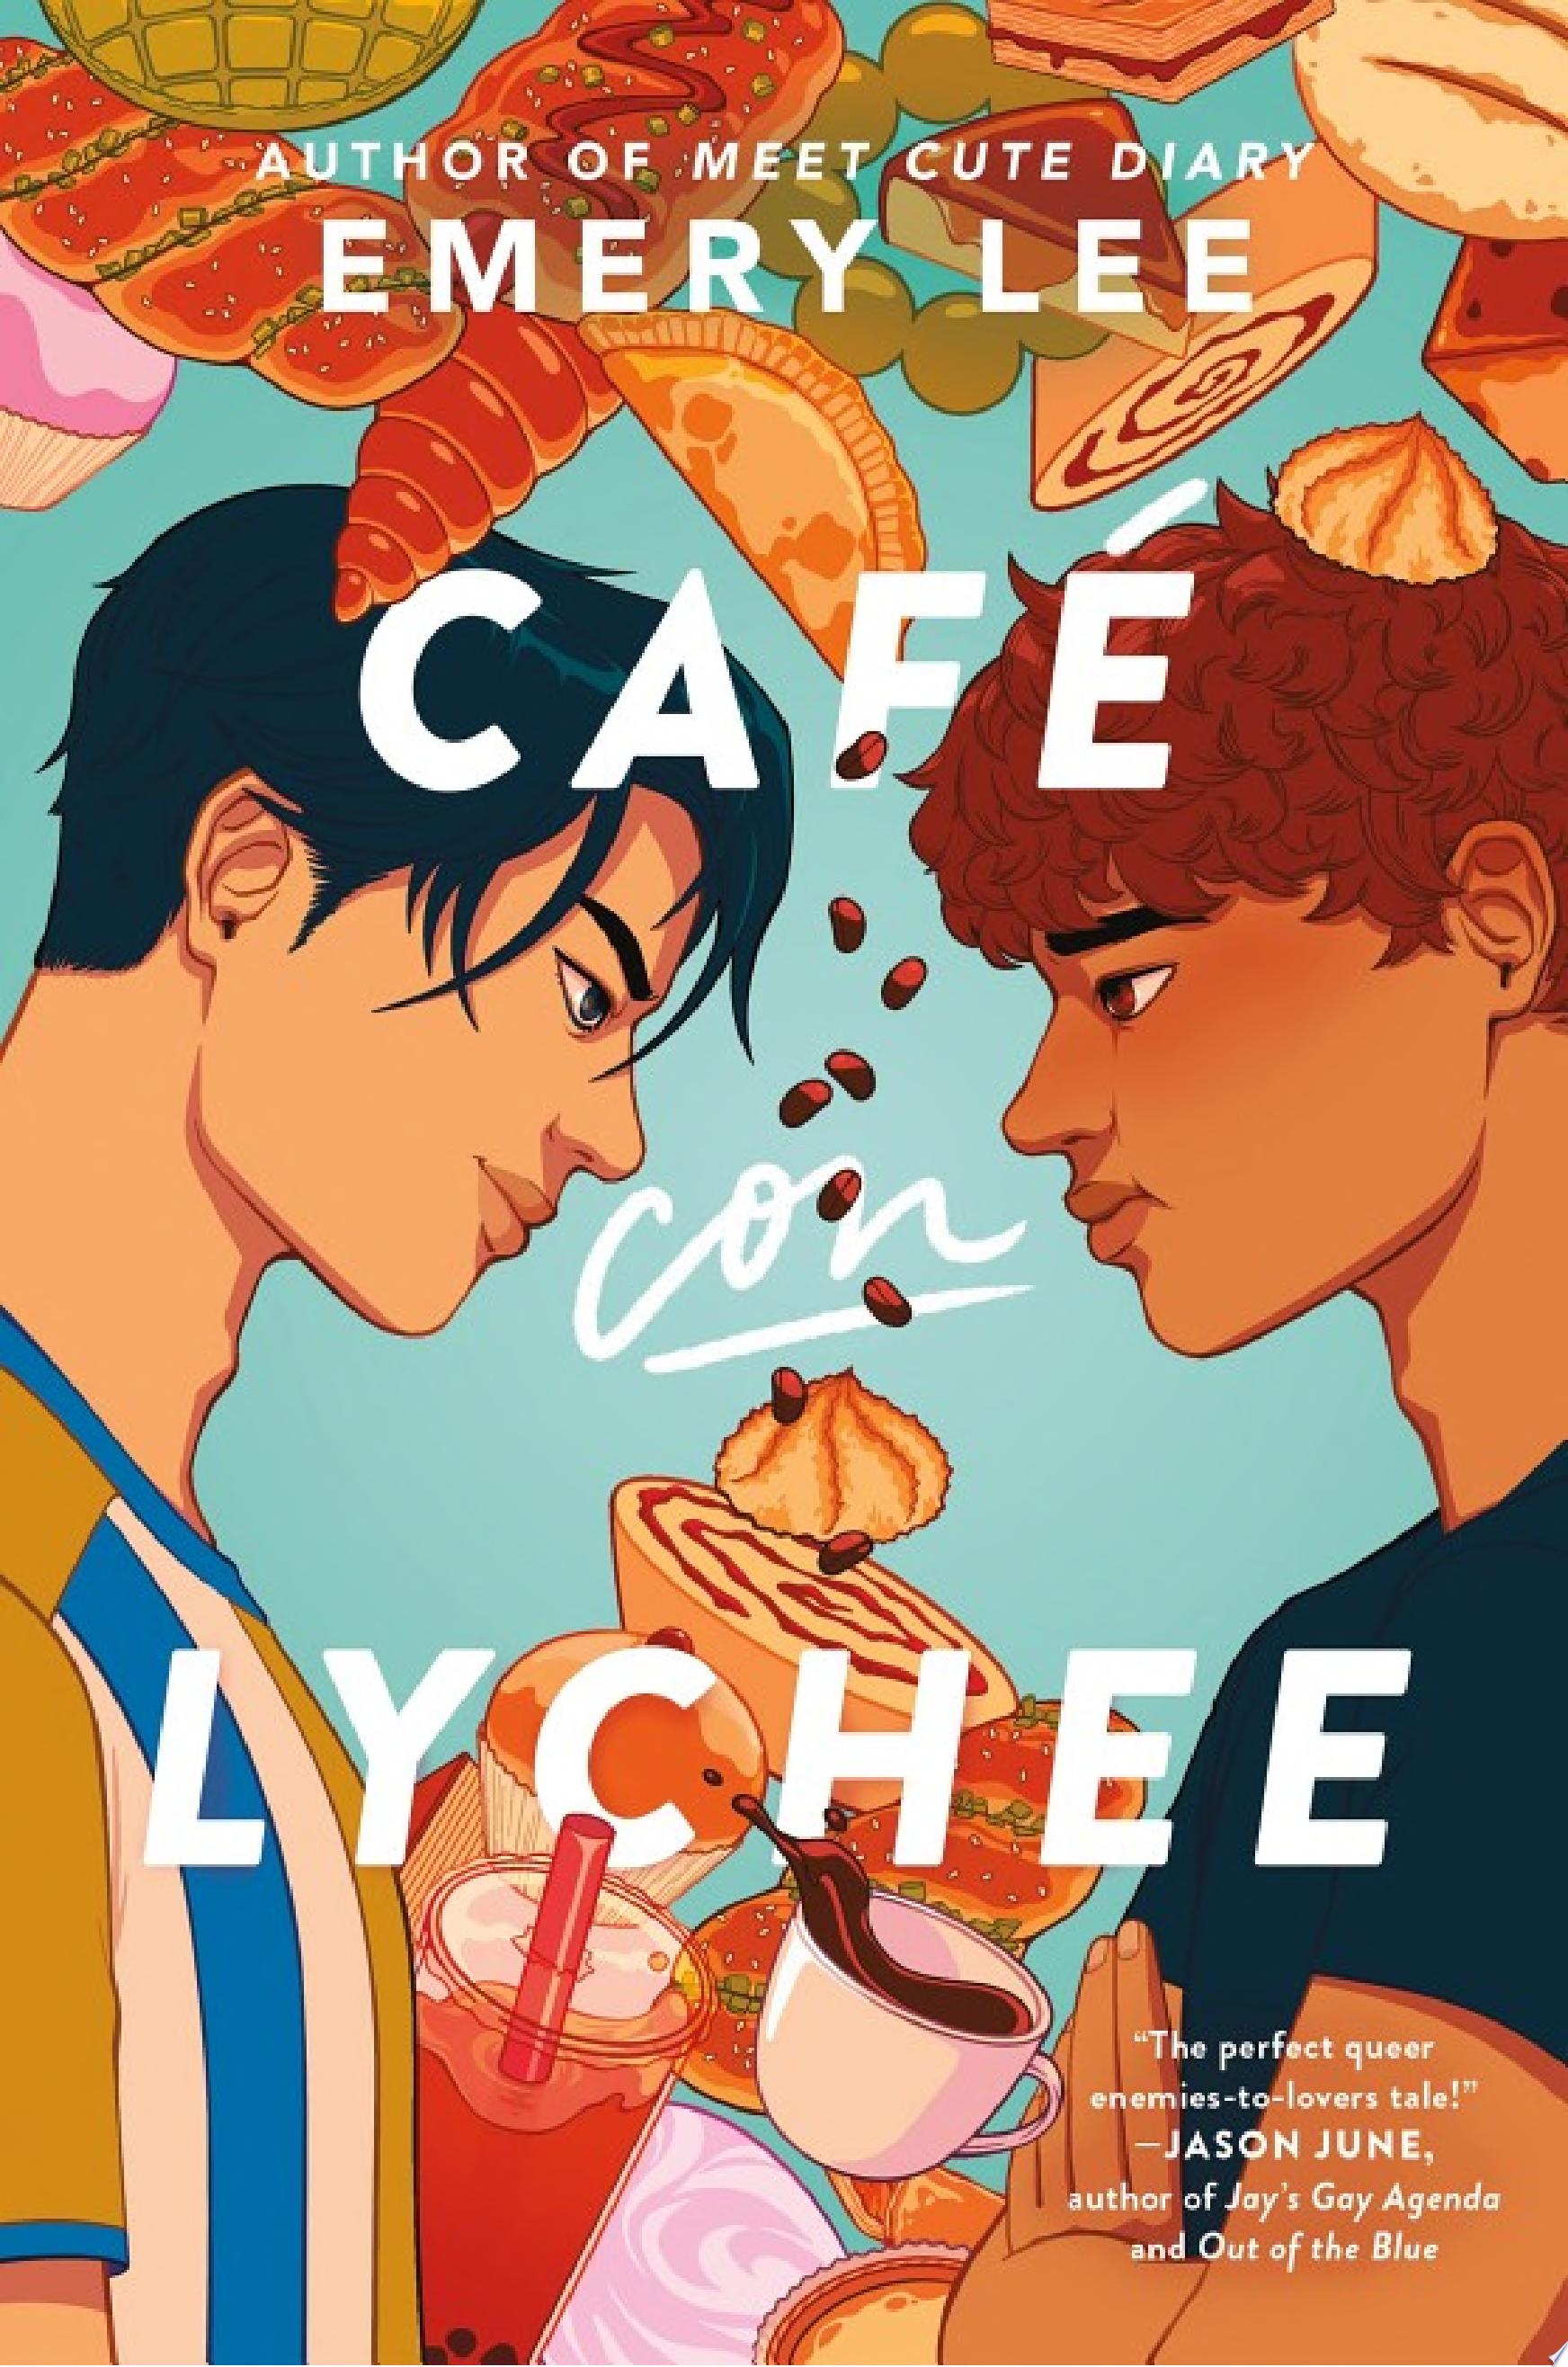 Image for "Café Con Lychee"